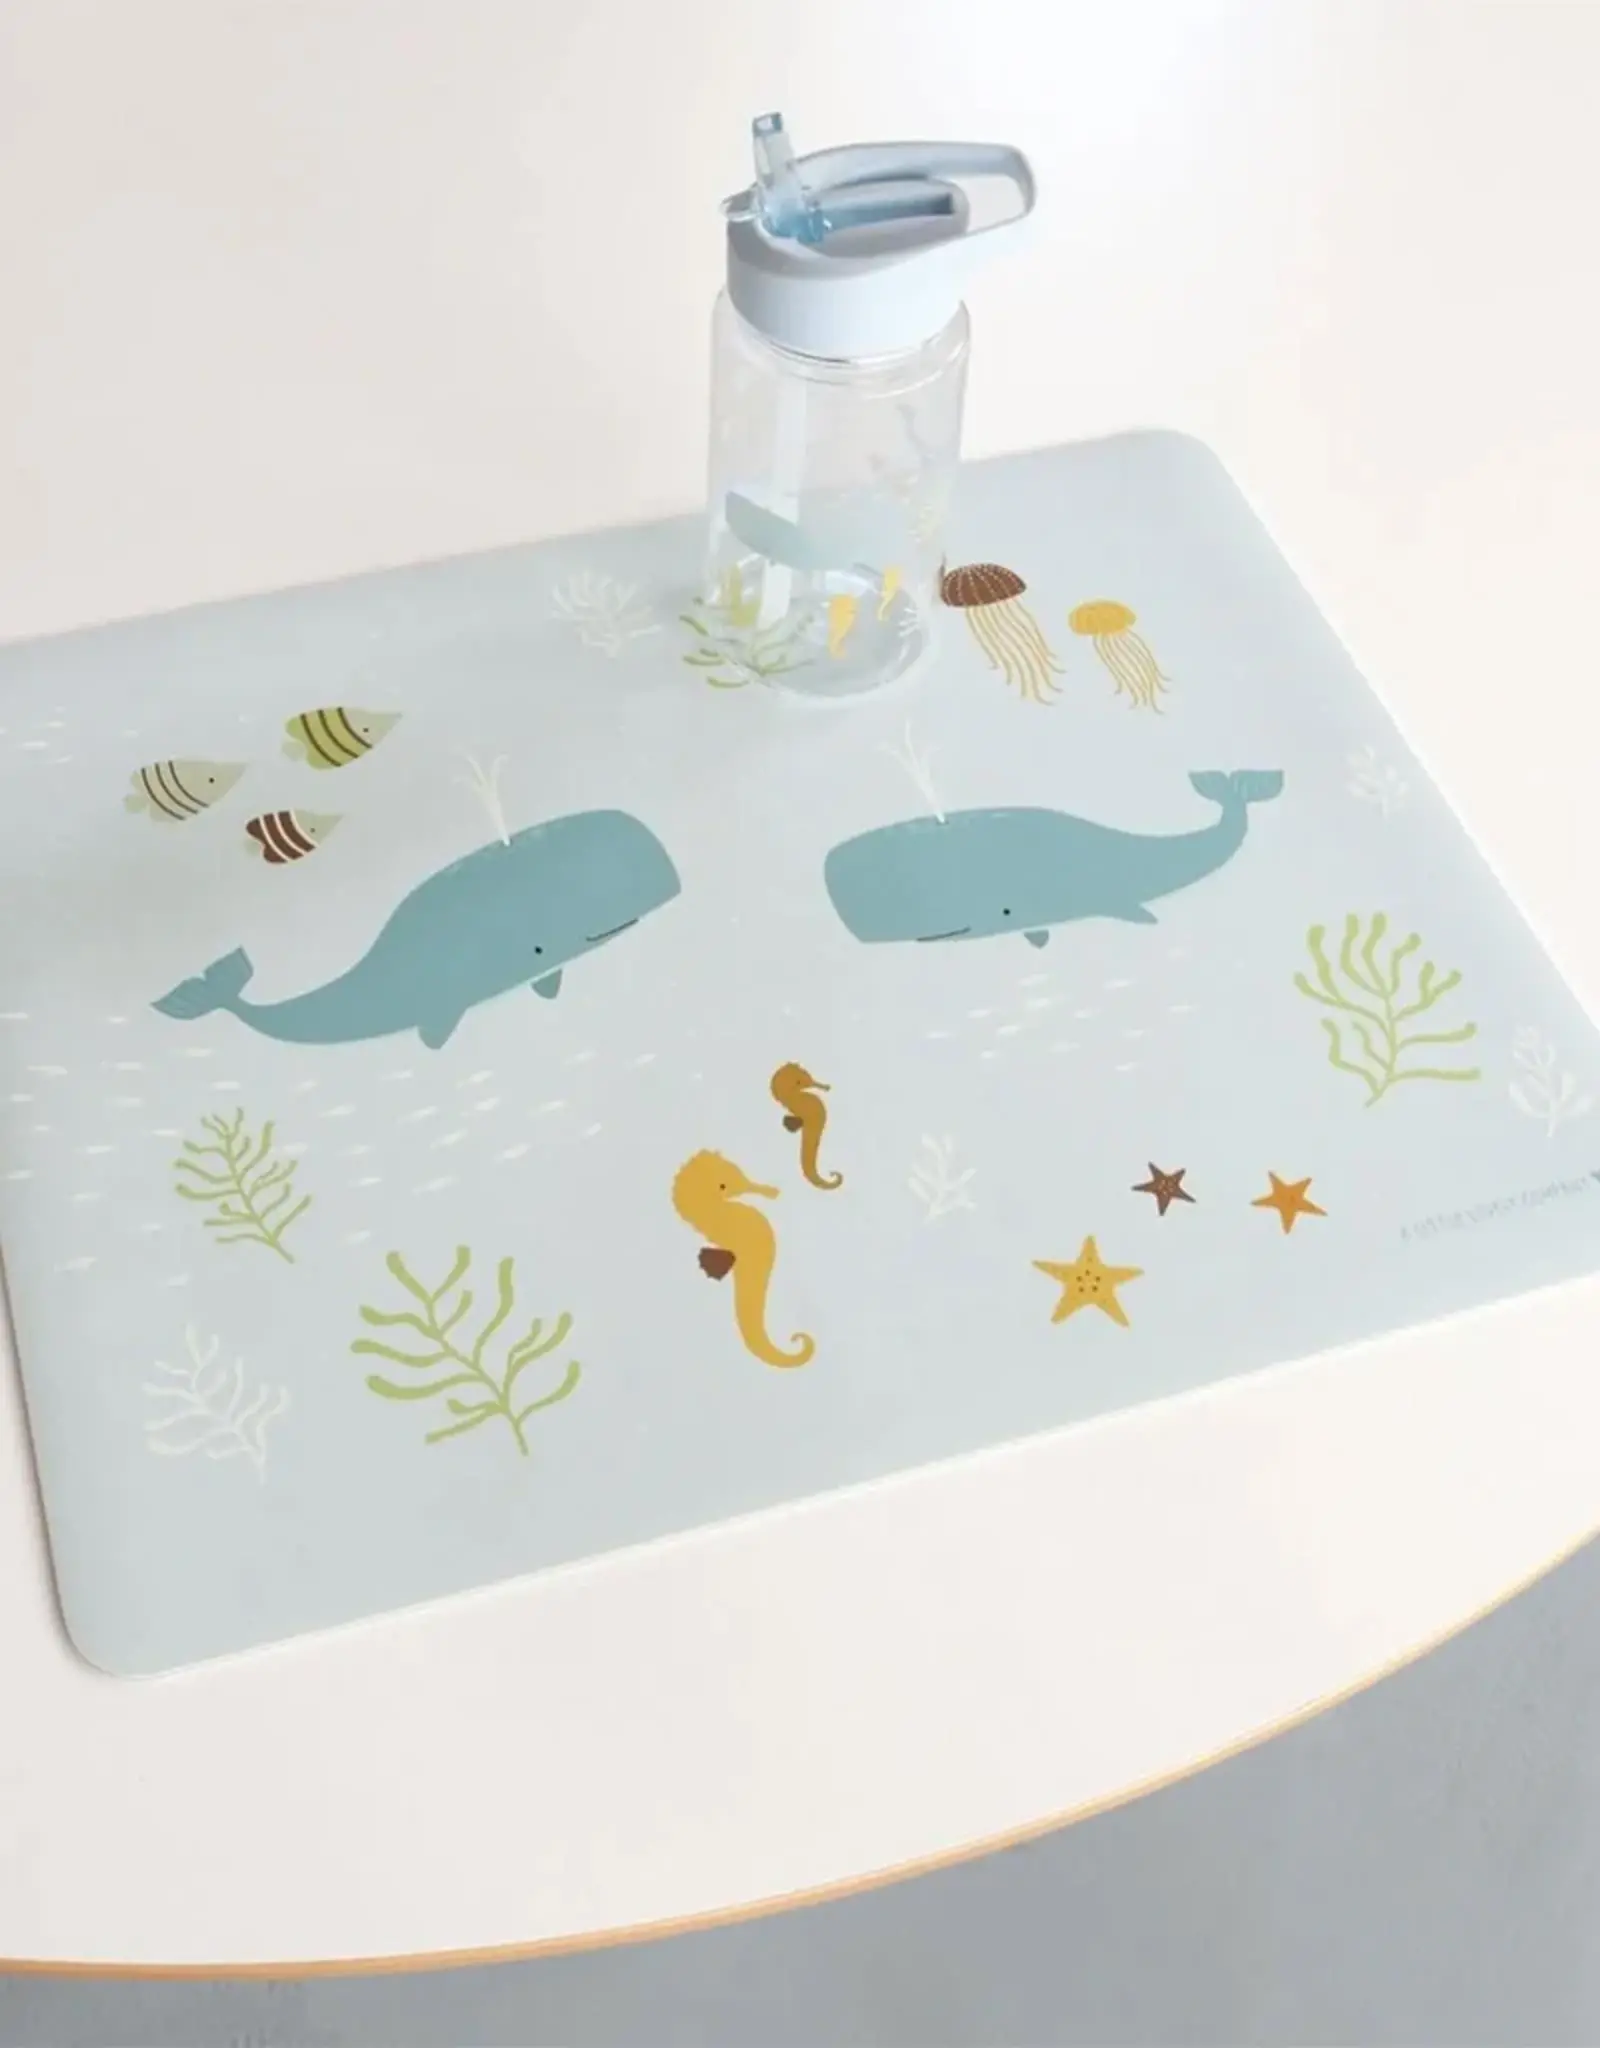 A Little Lovely Company Placemat - Oceaan